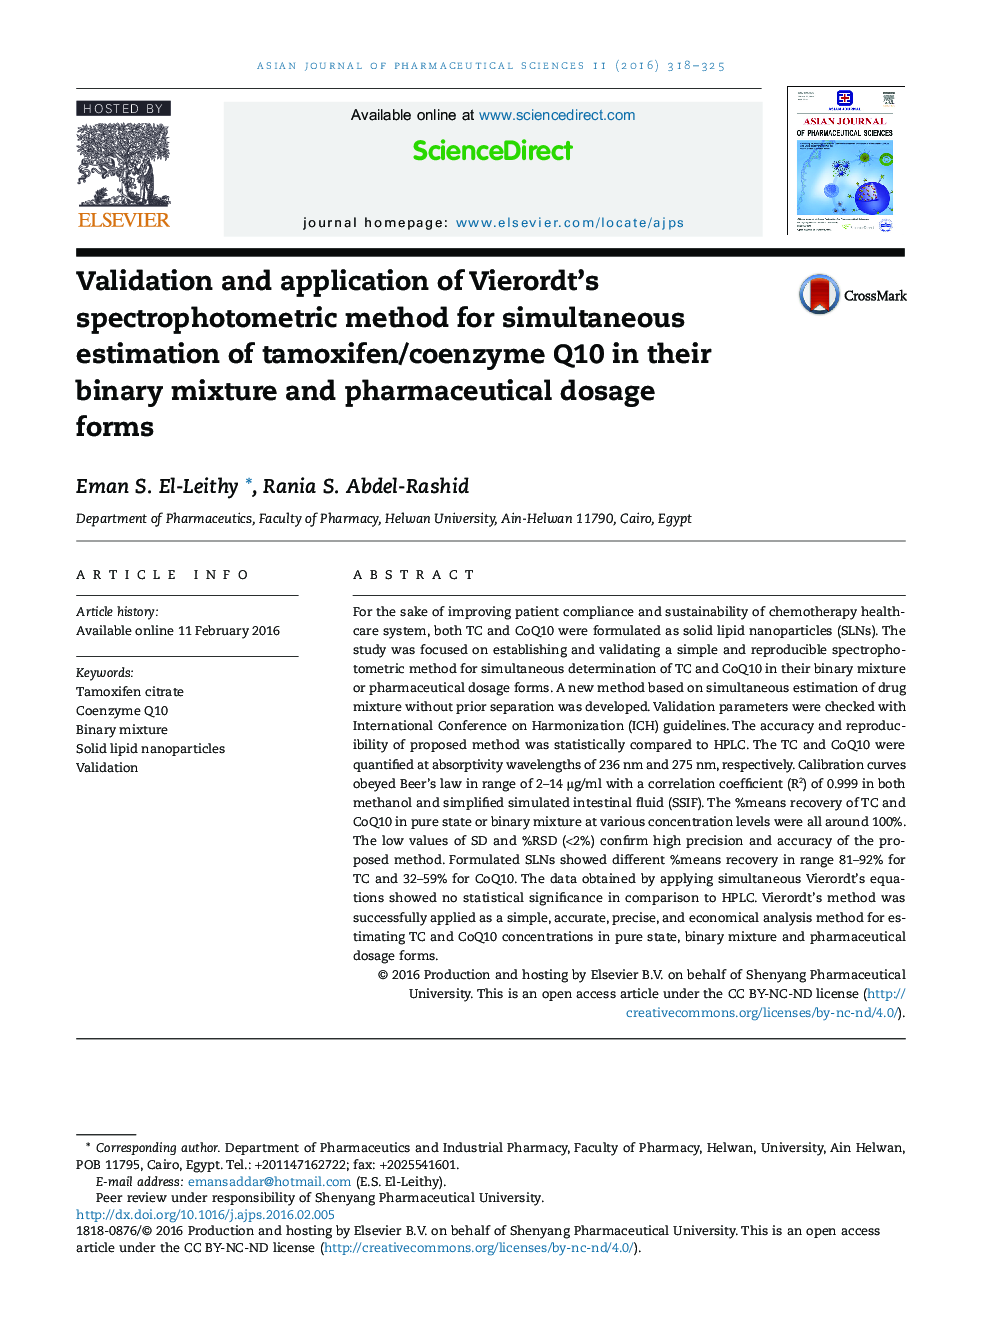 Validation and application of Vierordt's spectrophotometric method for simultaneous estimation of tamoxifen/coenzyme Q10 in their binary mixture and pharmaceutical dosage forms 